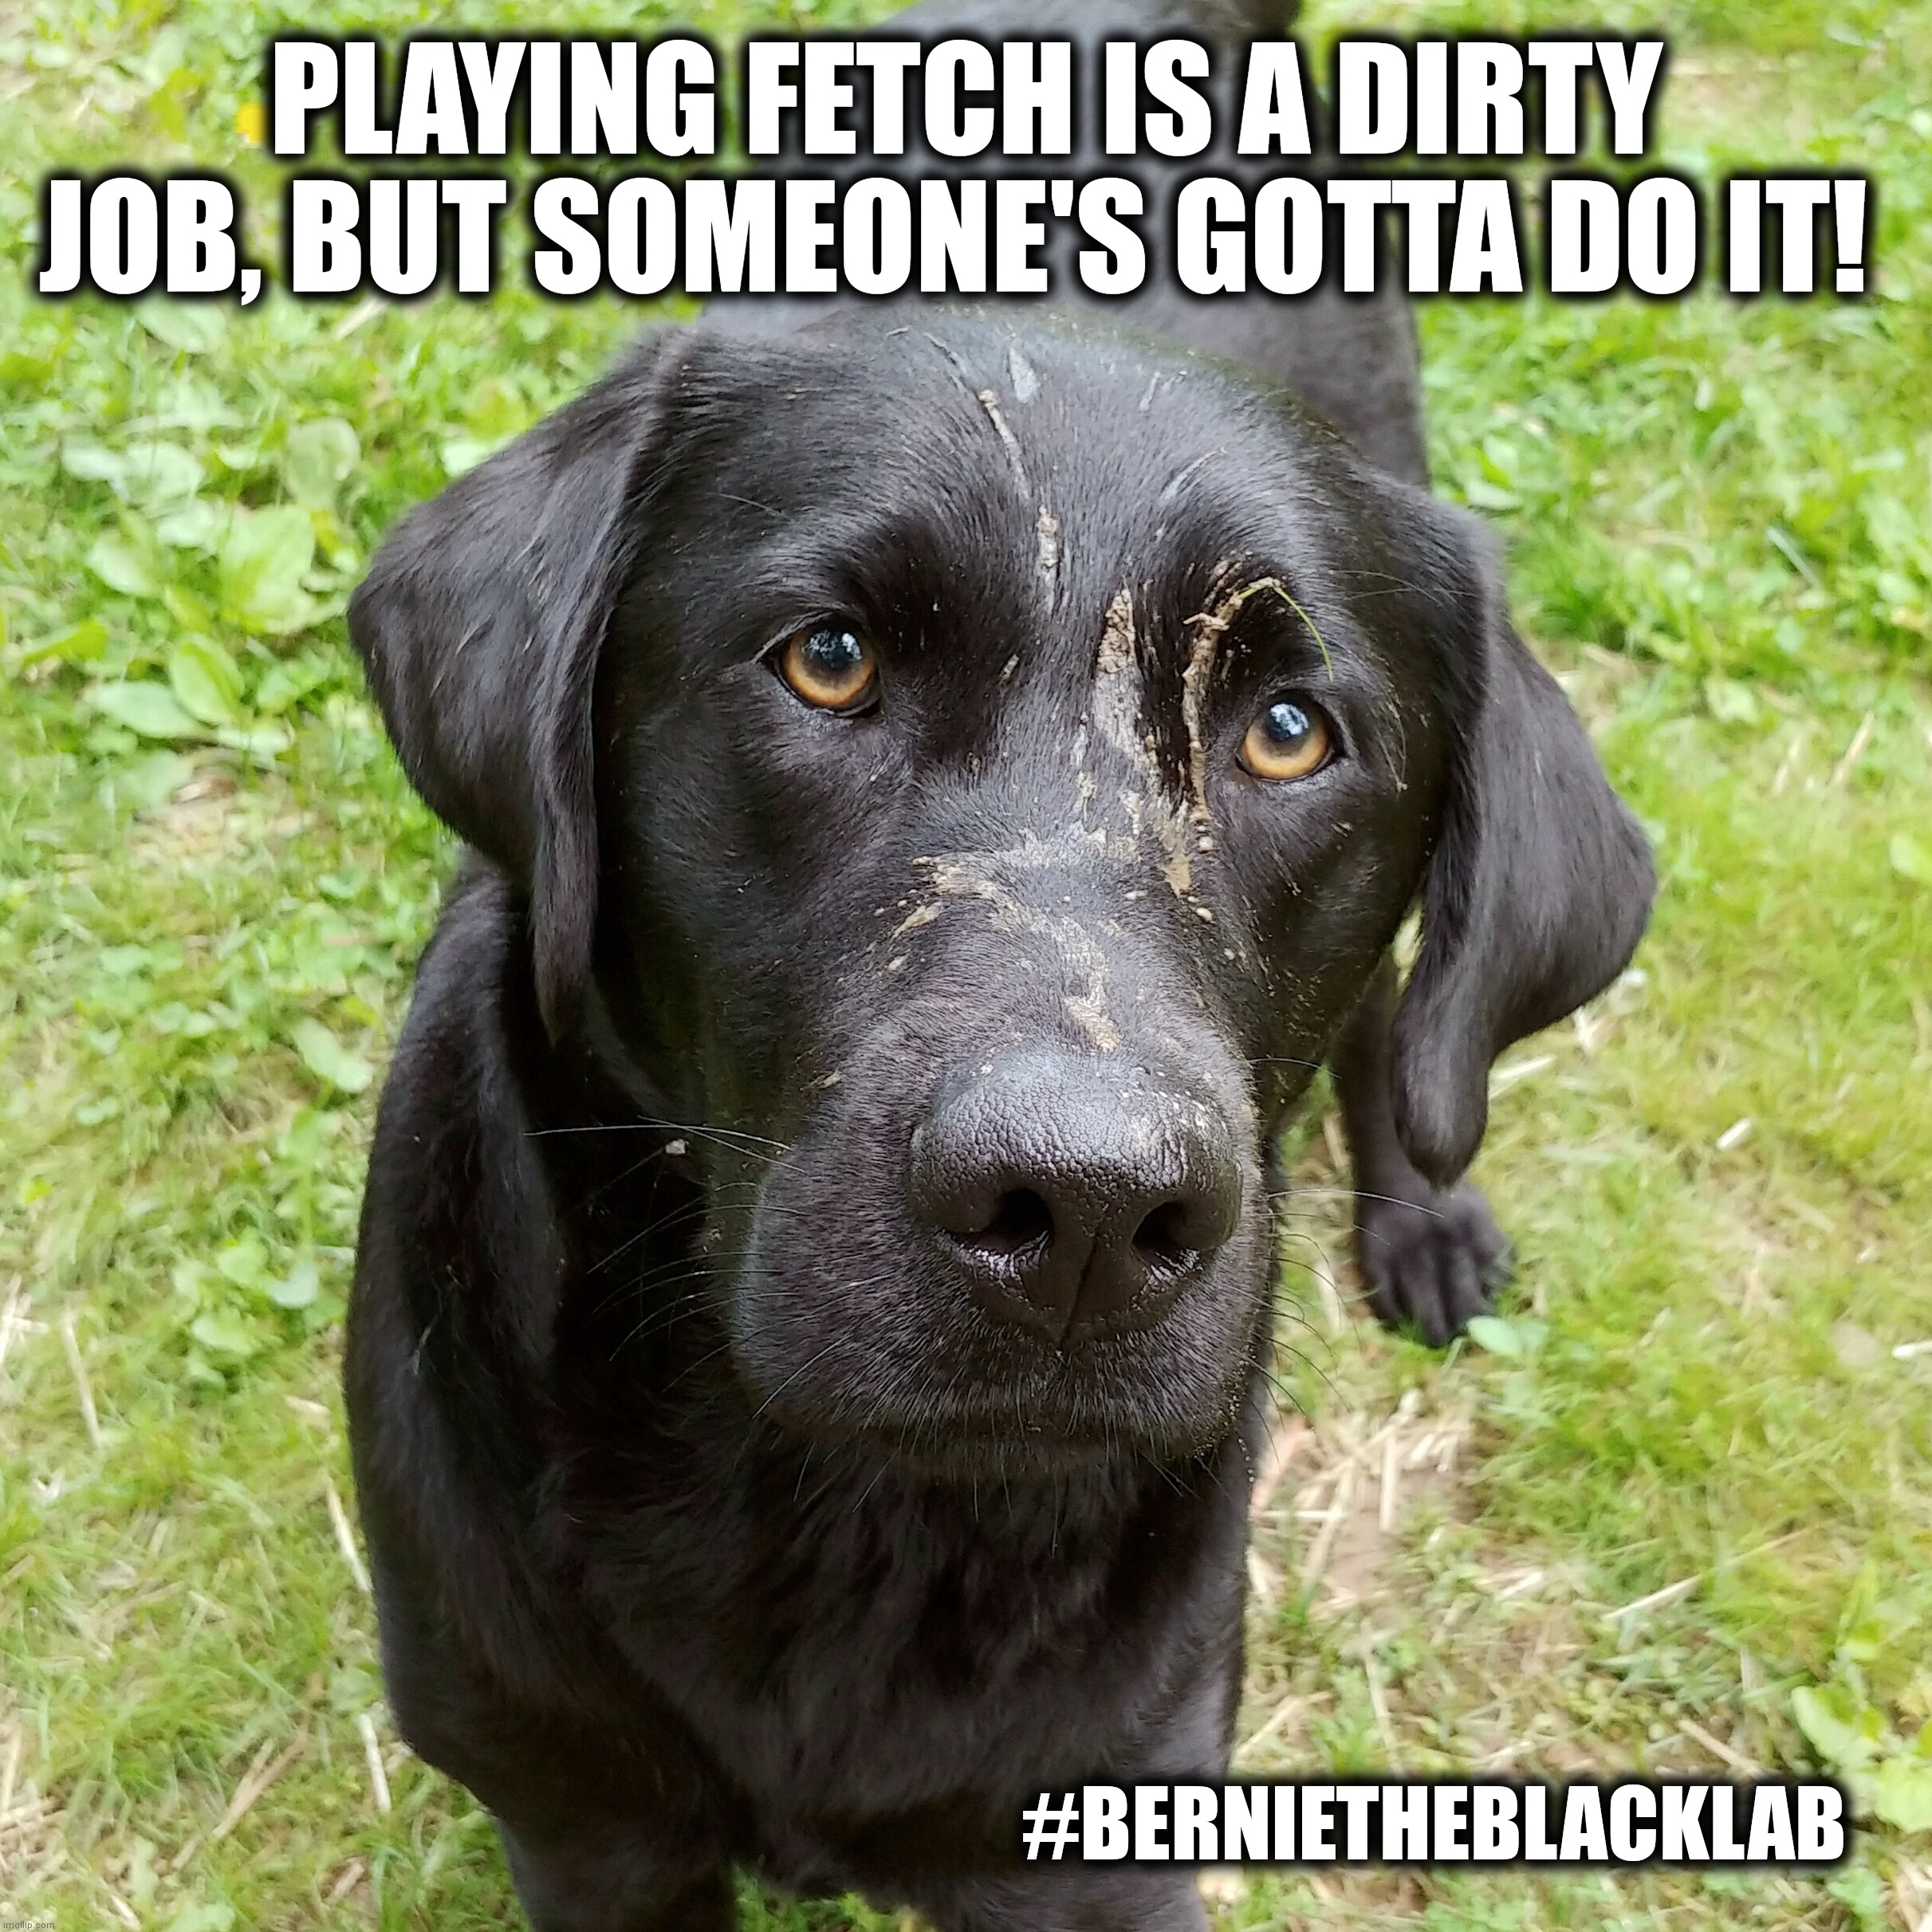 Playing fetch is a dirty job |  PLAYING FETCH IS A DIRTY JOB, BUT SOMEONE'S GOTTA DO IT! #BERNIETHEBLACKLAB | image tagged in bernie,dogs,memes,funny,fetch,bernie the black lab | made w/ Imgflip meme maker